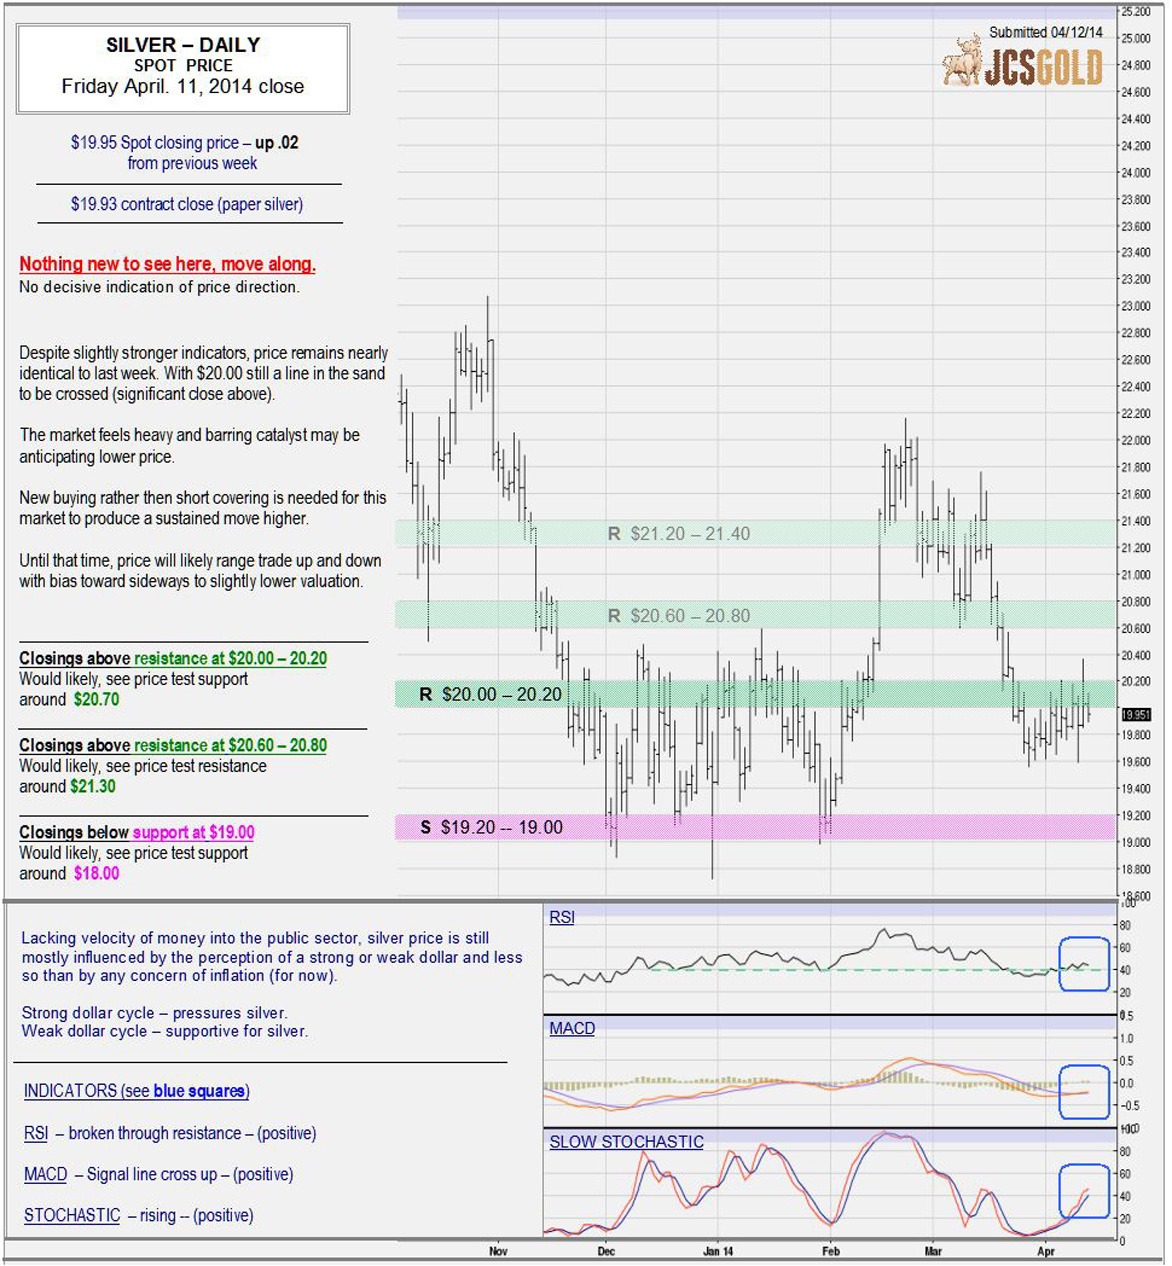 April 11, 2014 chart & commentary